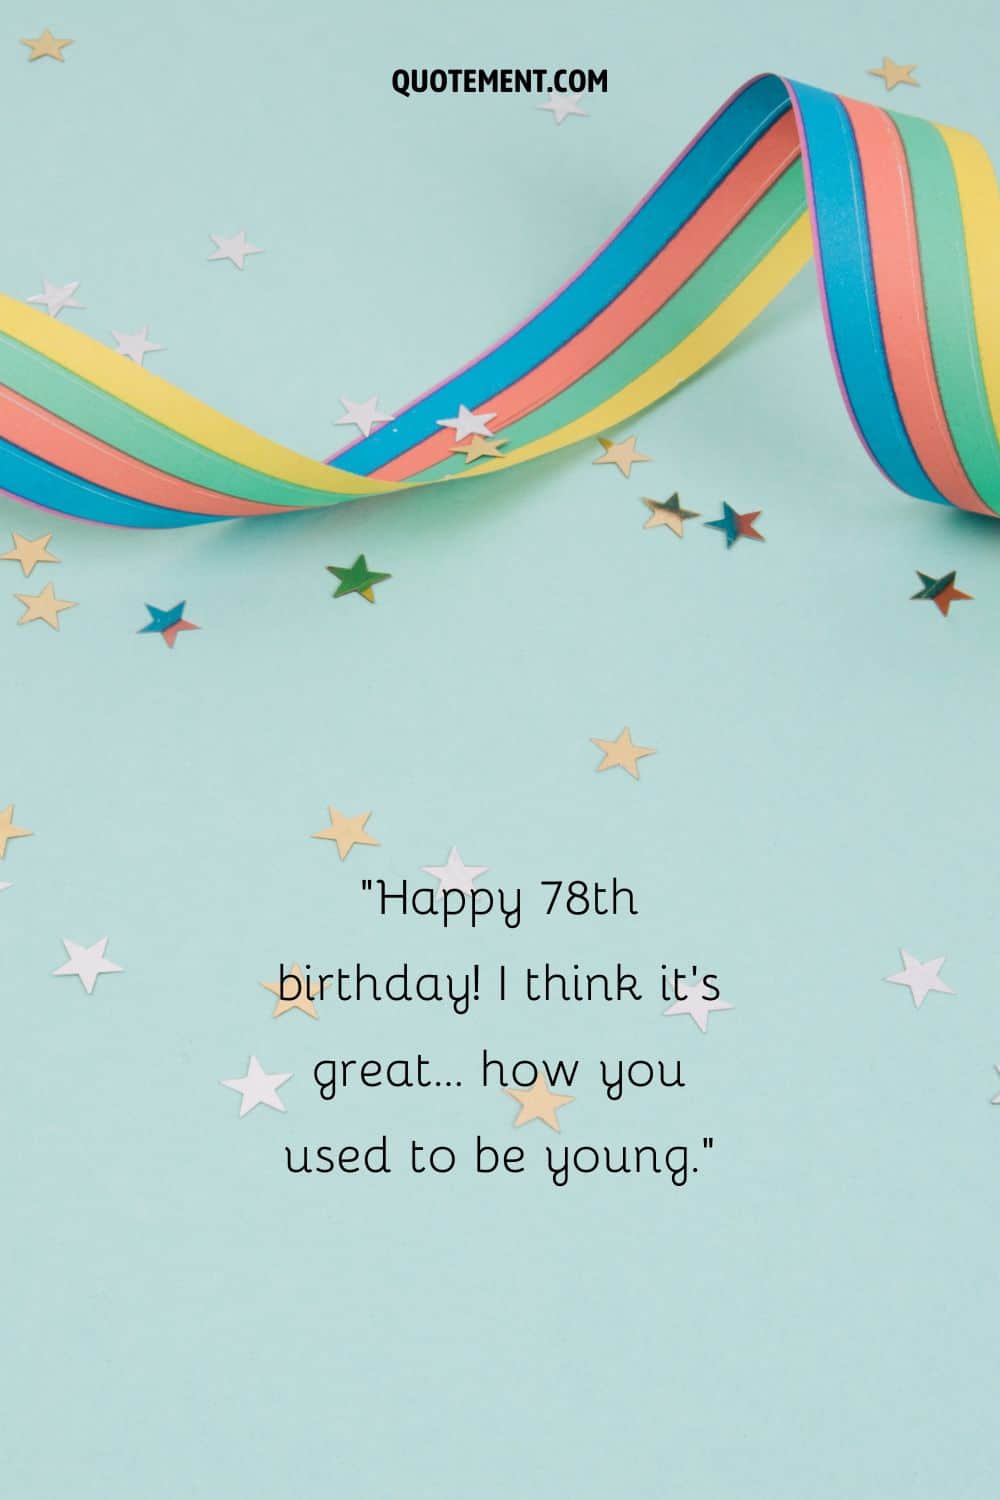 Happy 78th birthday! I think it’s great… how you used to be young